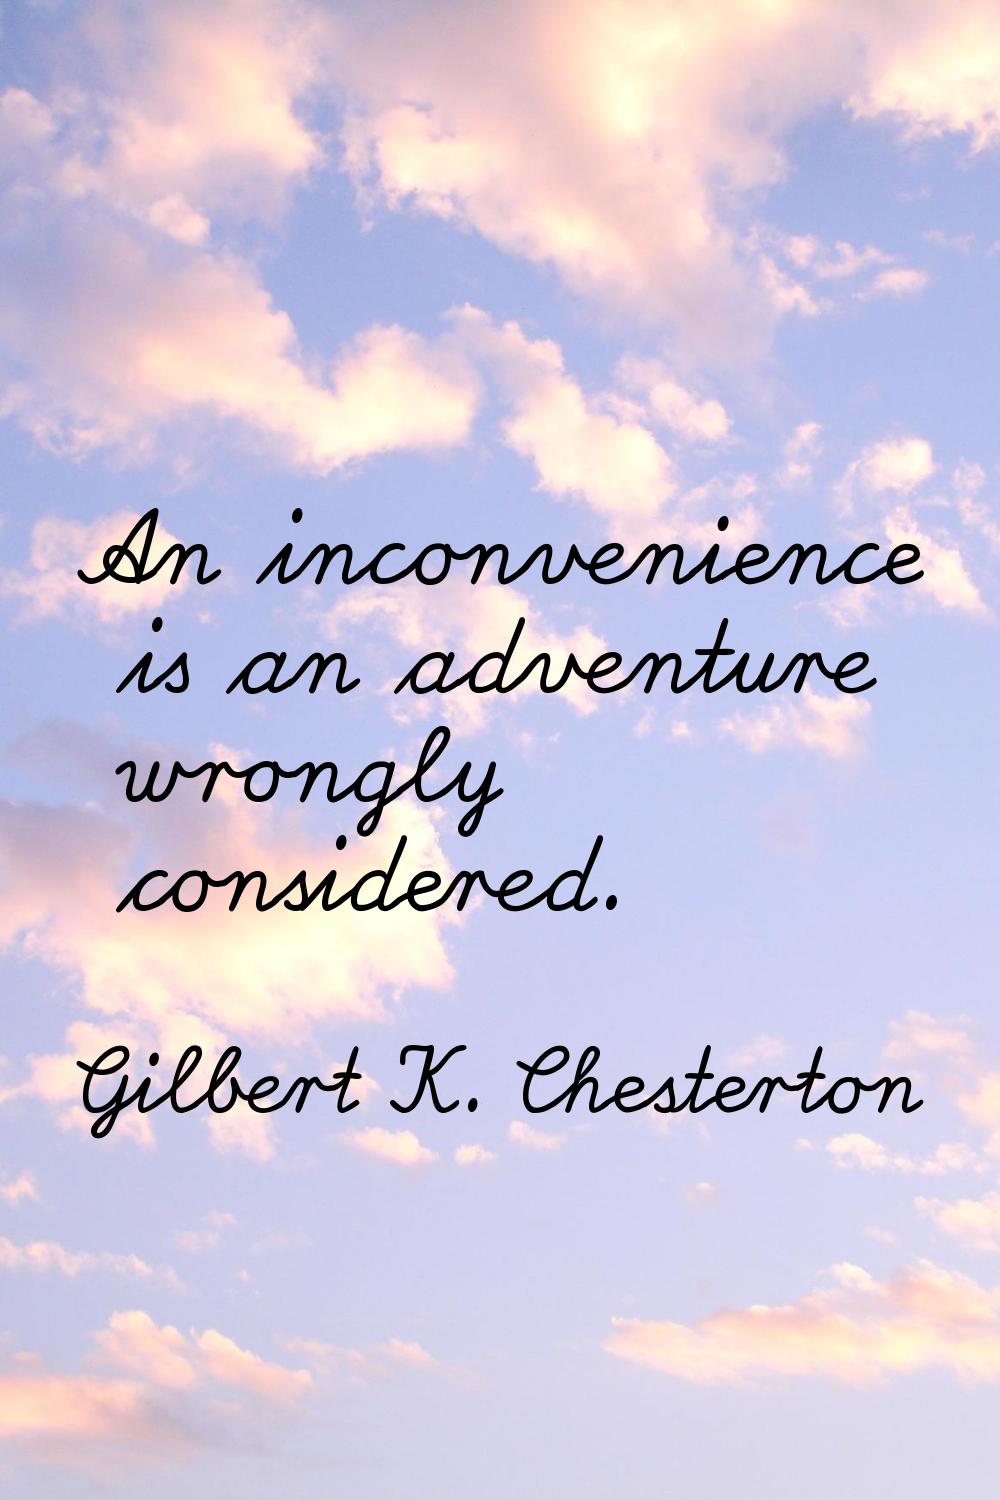 An inconvenience is an adventure wrongly considered.